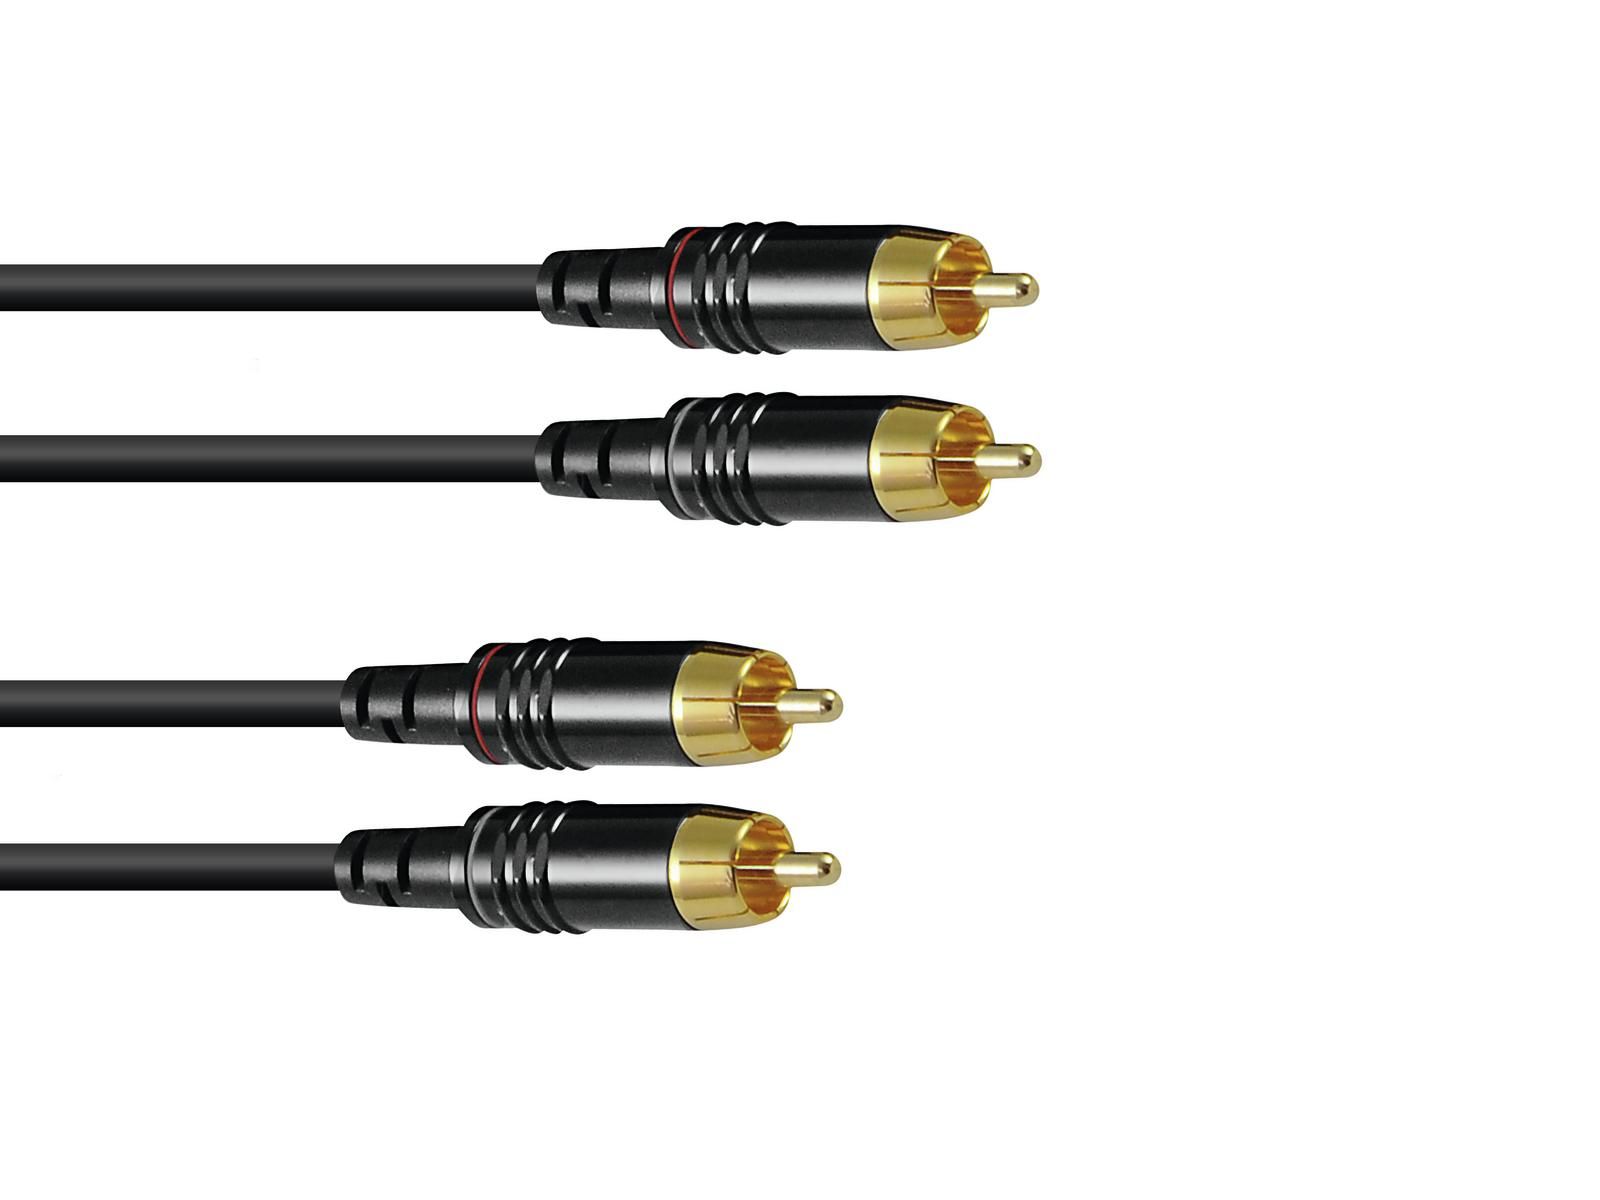 Sommer RCA cable 2x2 1m Black Hicon